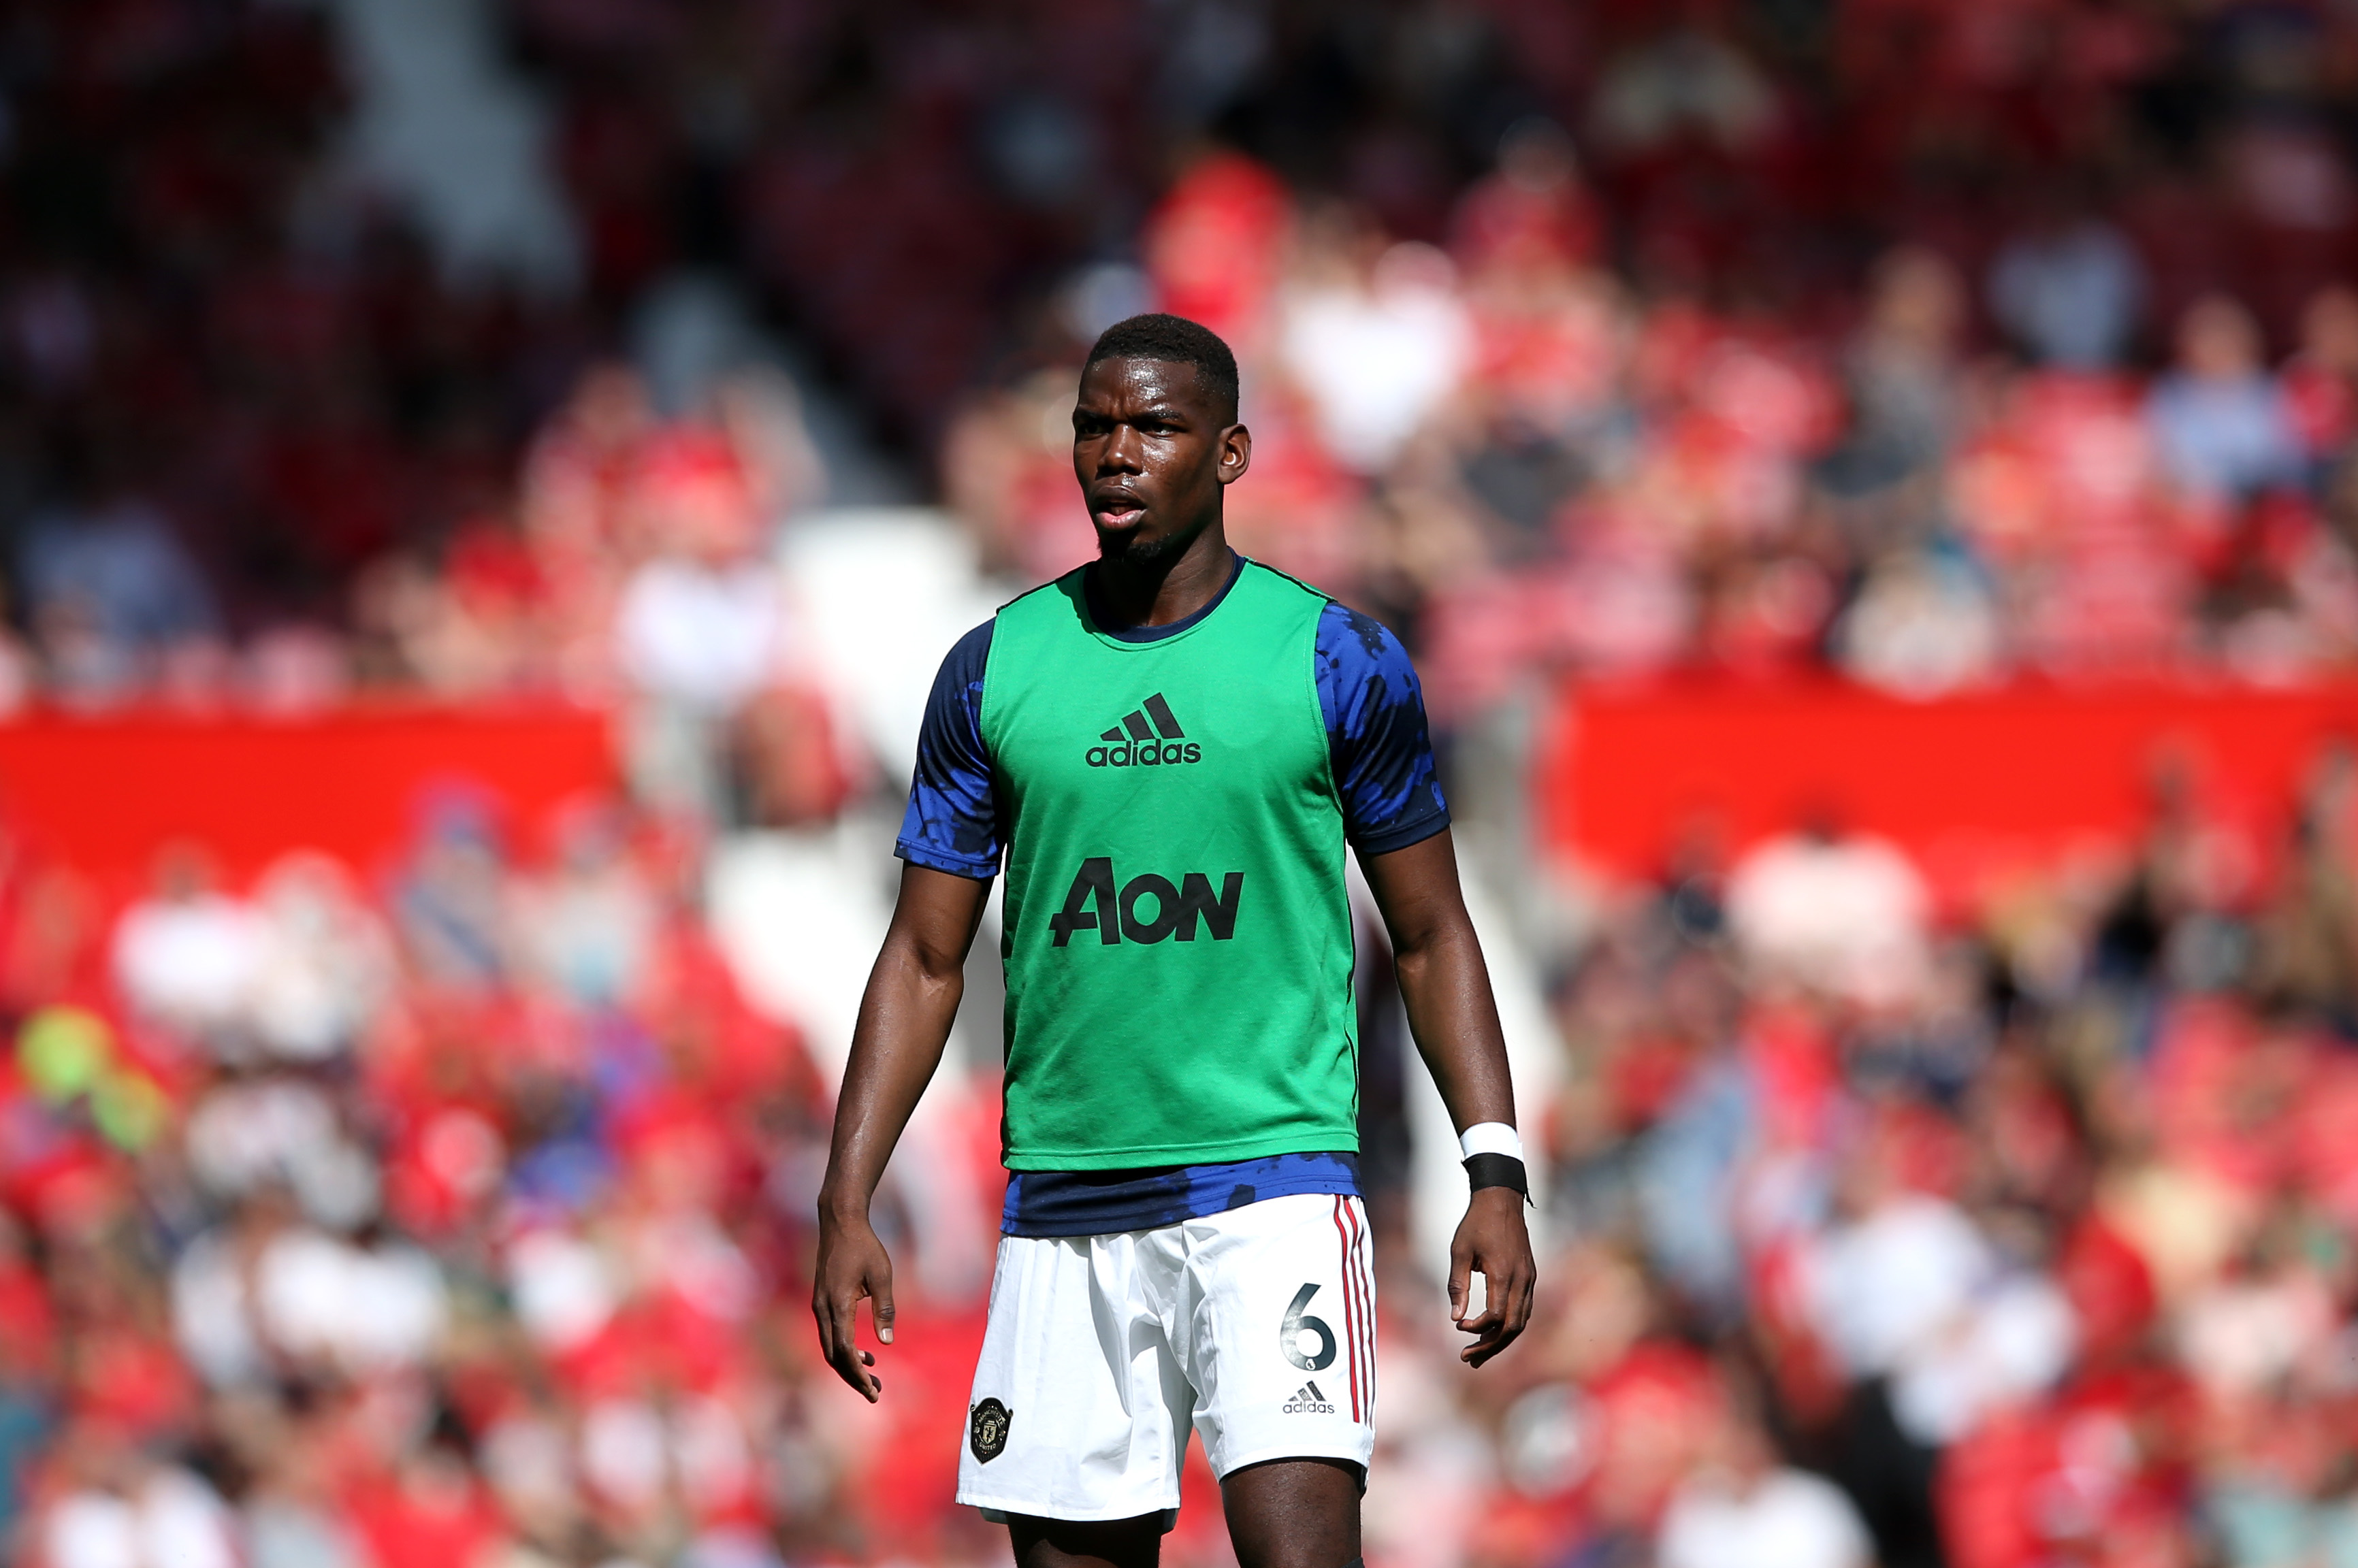 MANCHESTER, ENGLAND - AUGUST 24: Paul Pogba of Manchester United looks on prior to the Premier League match between Manchester United and Crystal Palace at Old Trafford on August 24, 2019 in Manchester, United Kingdom. (Photo by Jan Kruger/Getty Images)